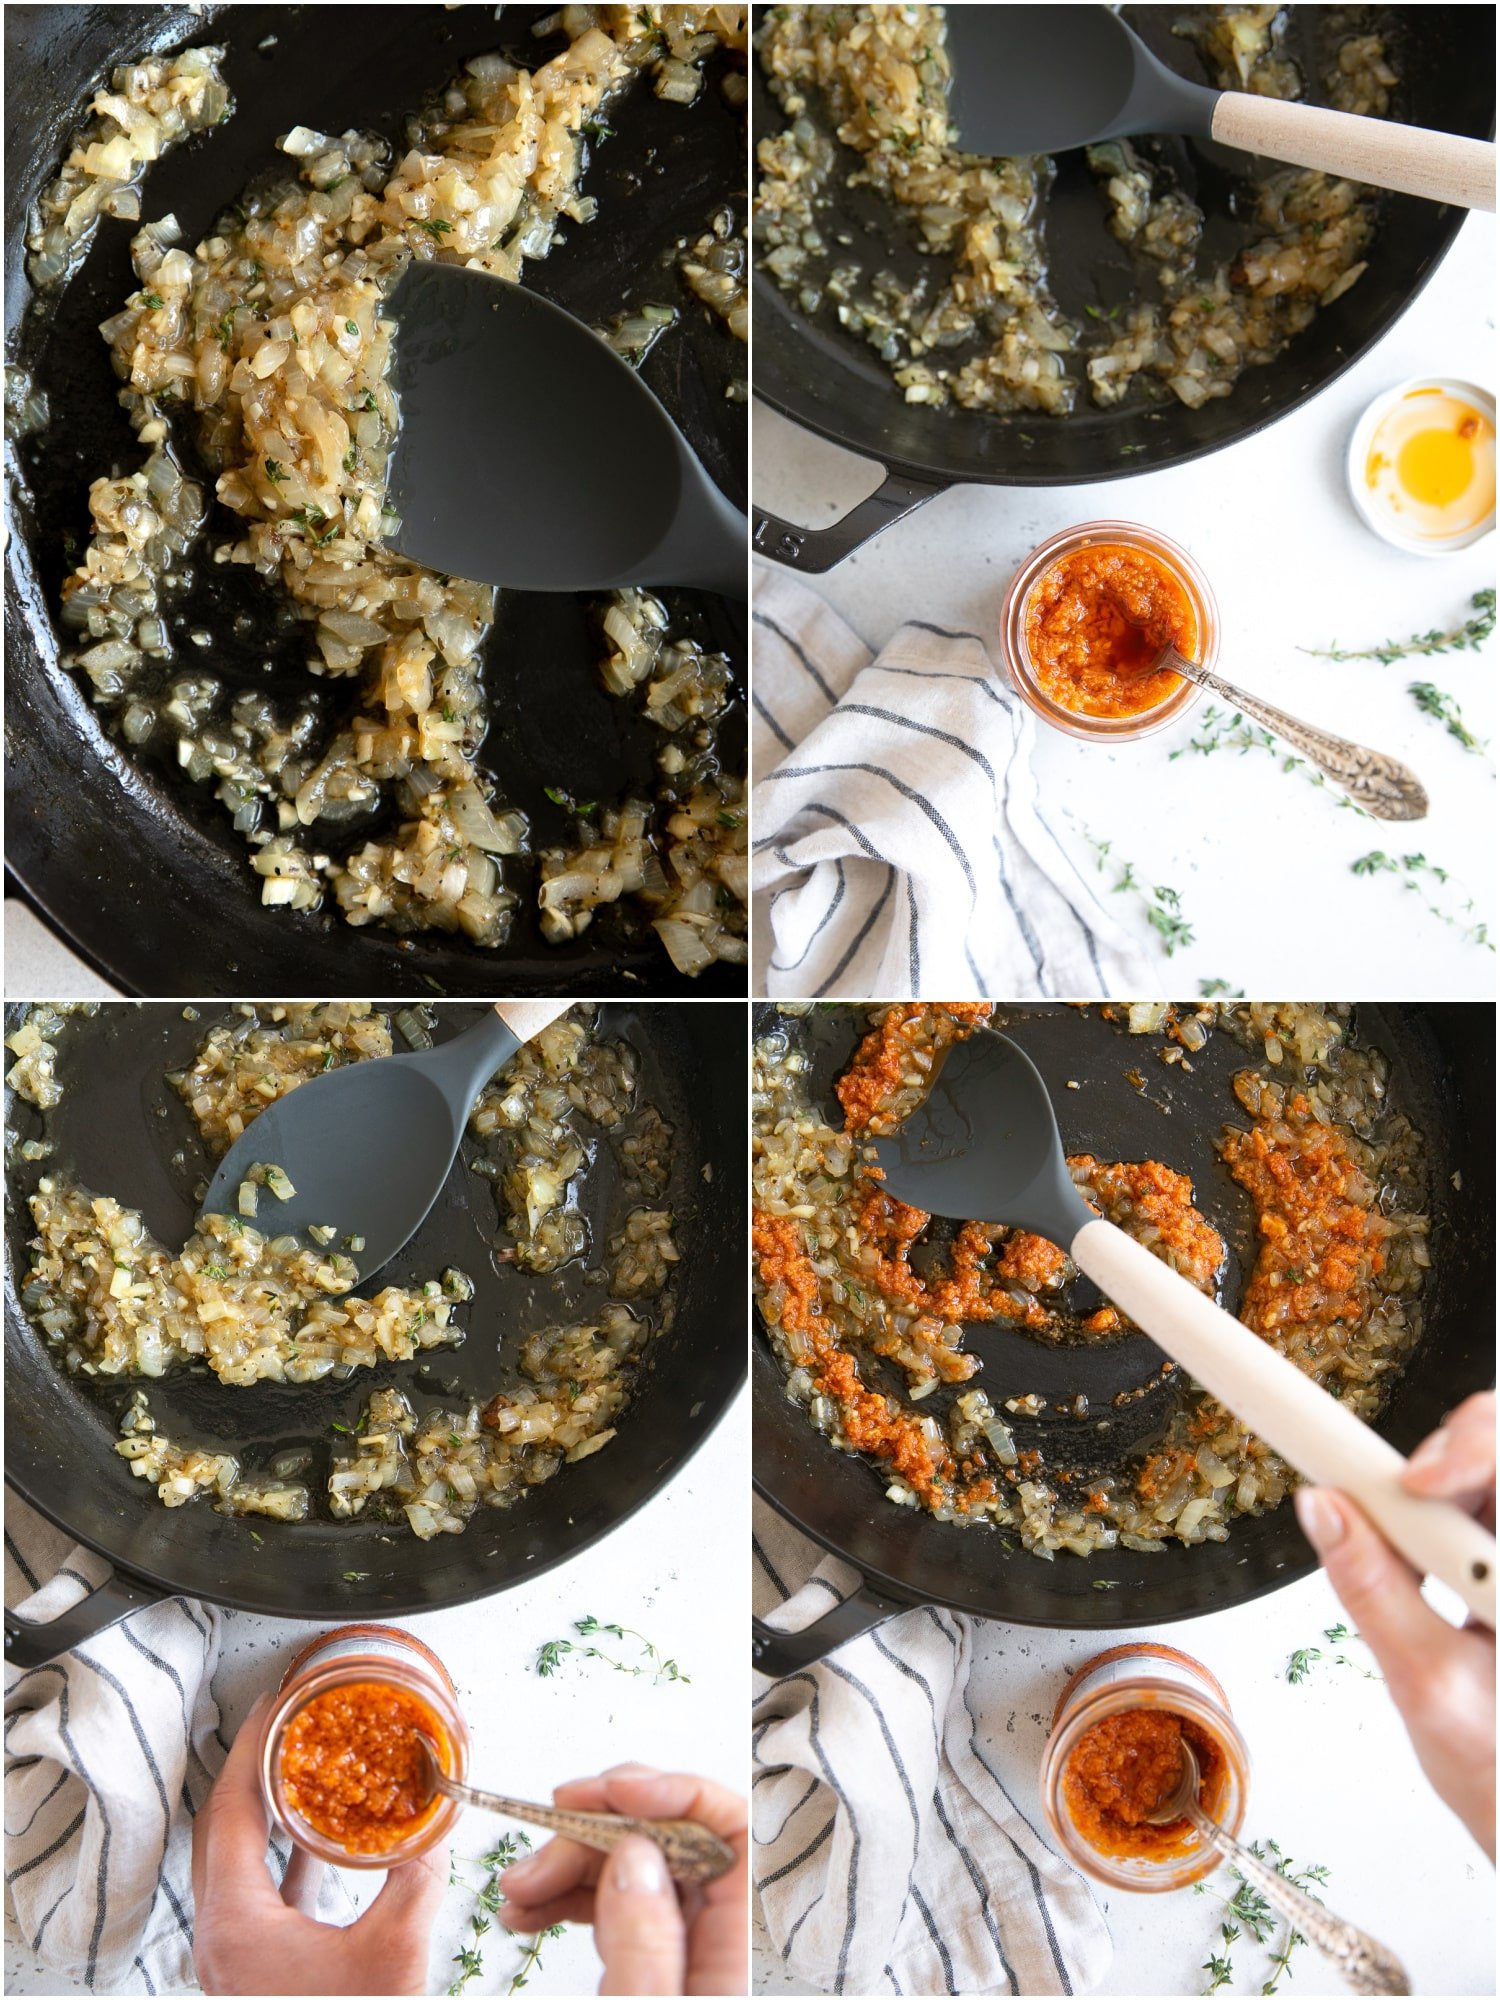 Collage of 4 images showing how to make creamy sundried tomato pesto sauce.